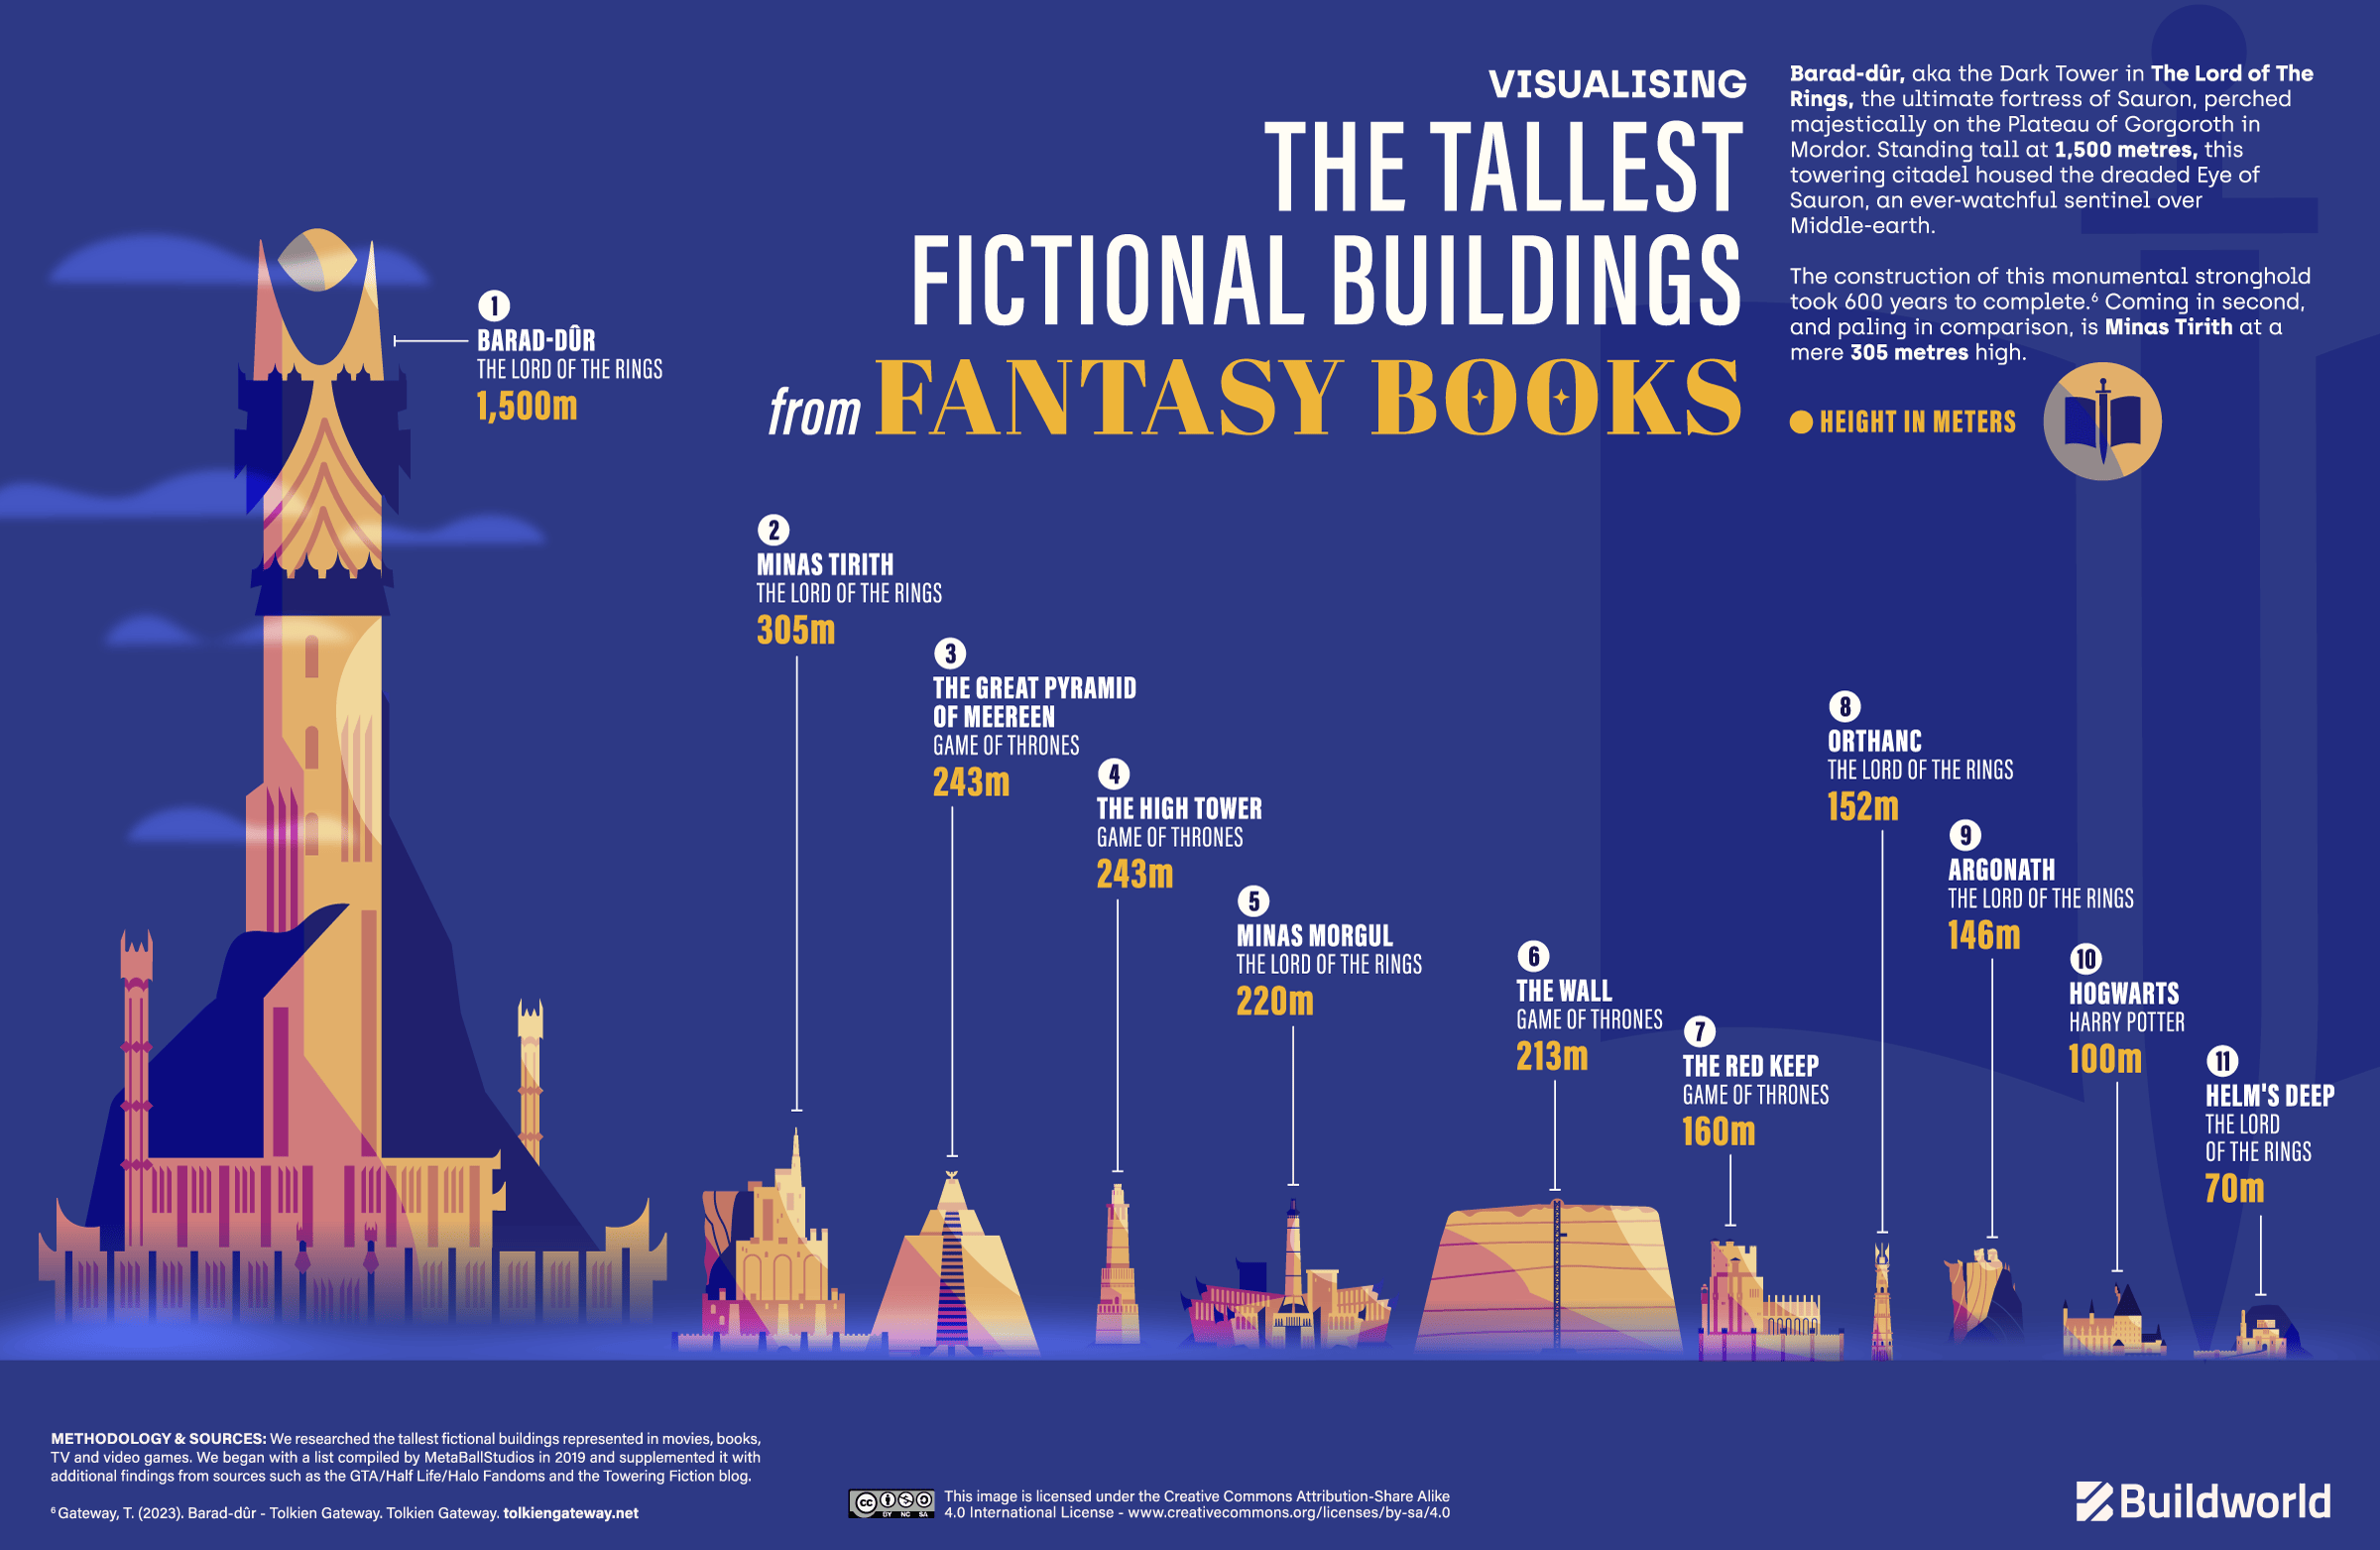 The tallest fictional buildings in fantasy books visualised